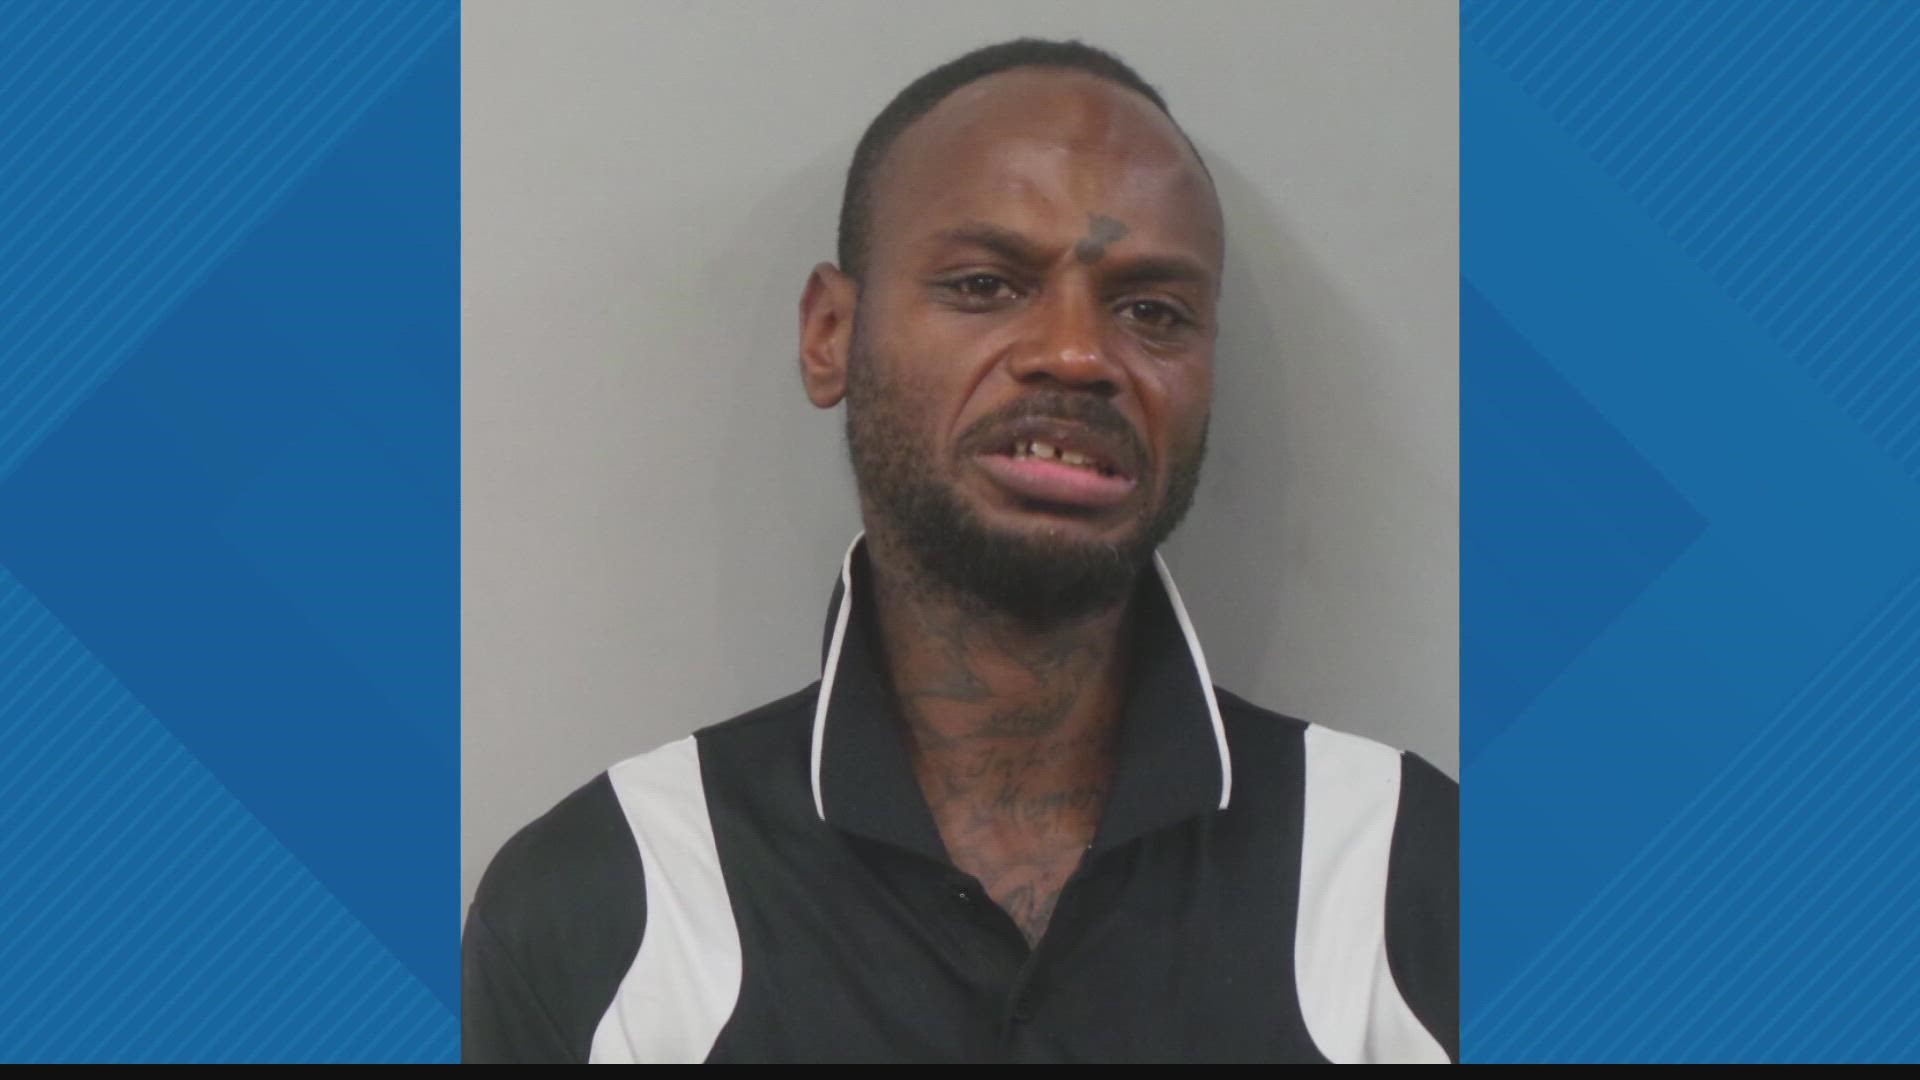 Tony Hannah Jr., a 34-year-old St. Louis resident, is being held on a $100,000, cash-only bond.